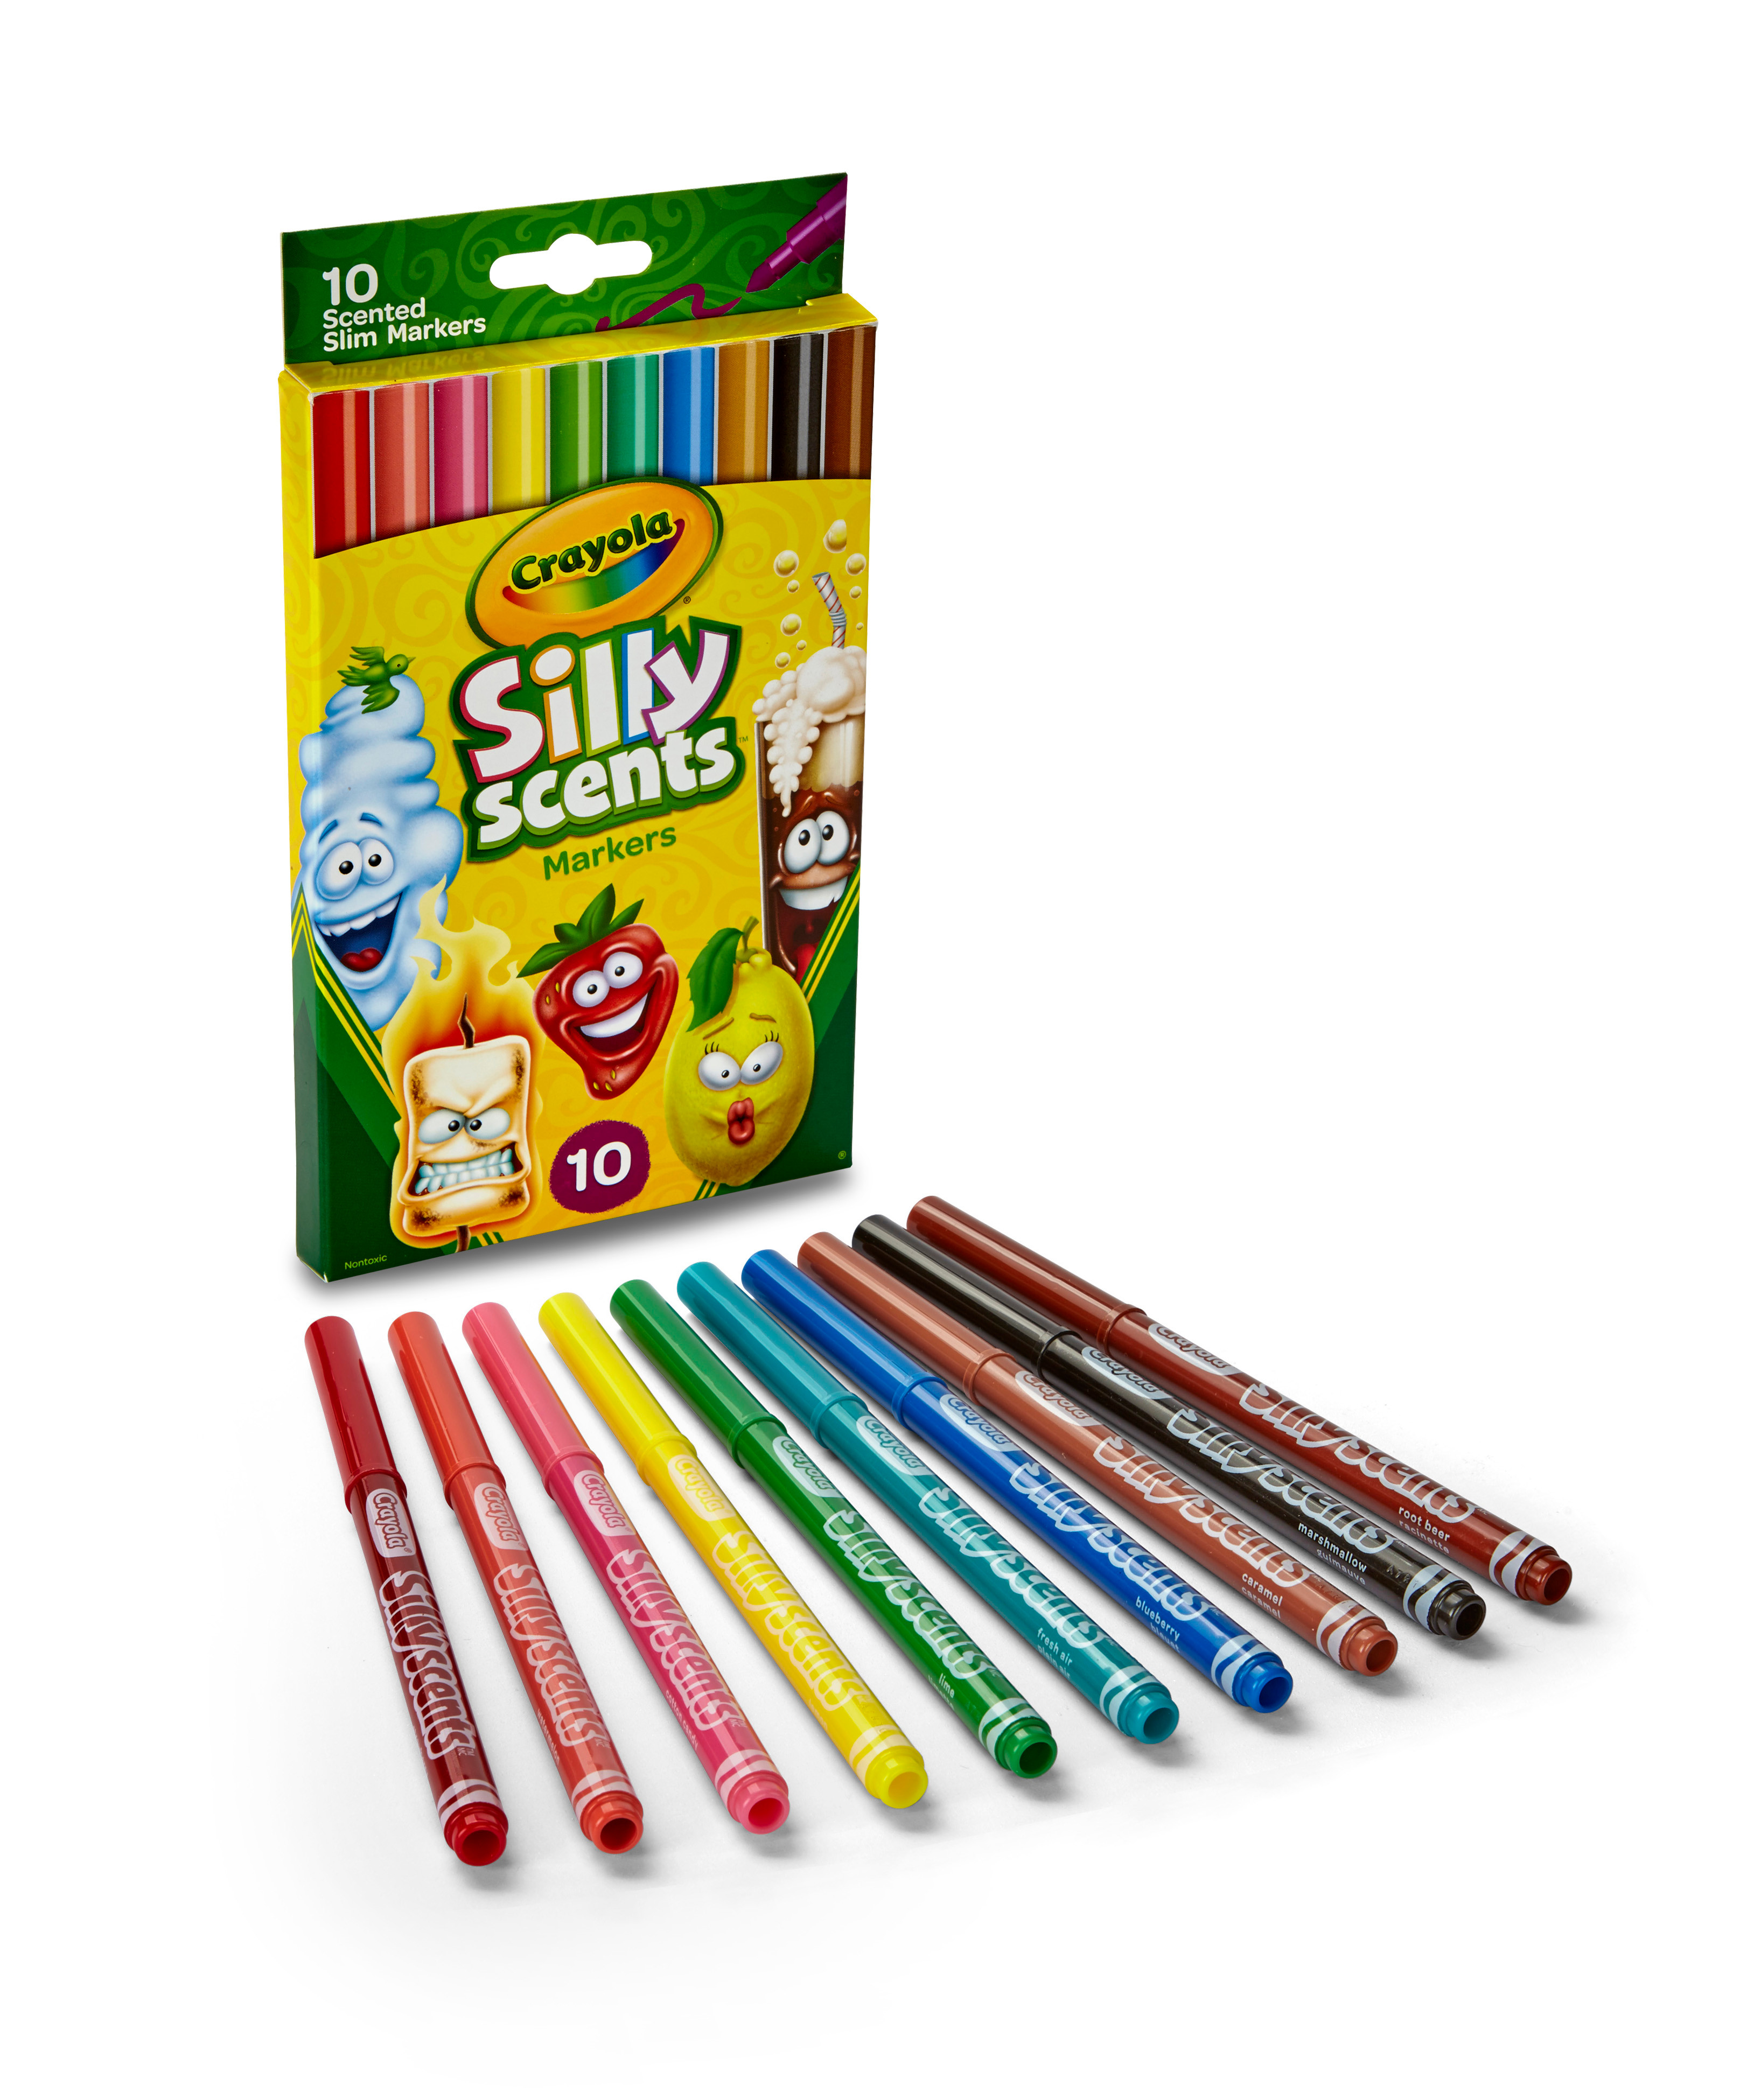 Paints Crayola Crayons Siily Scents Pencils Colour Wonder Markers Tubs ... 